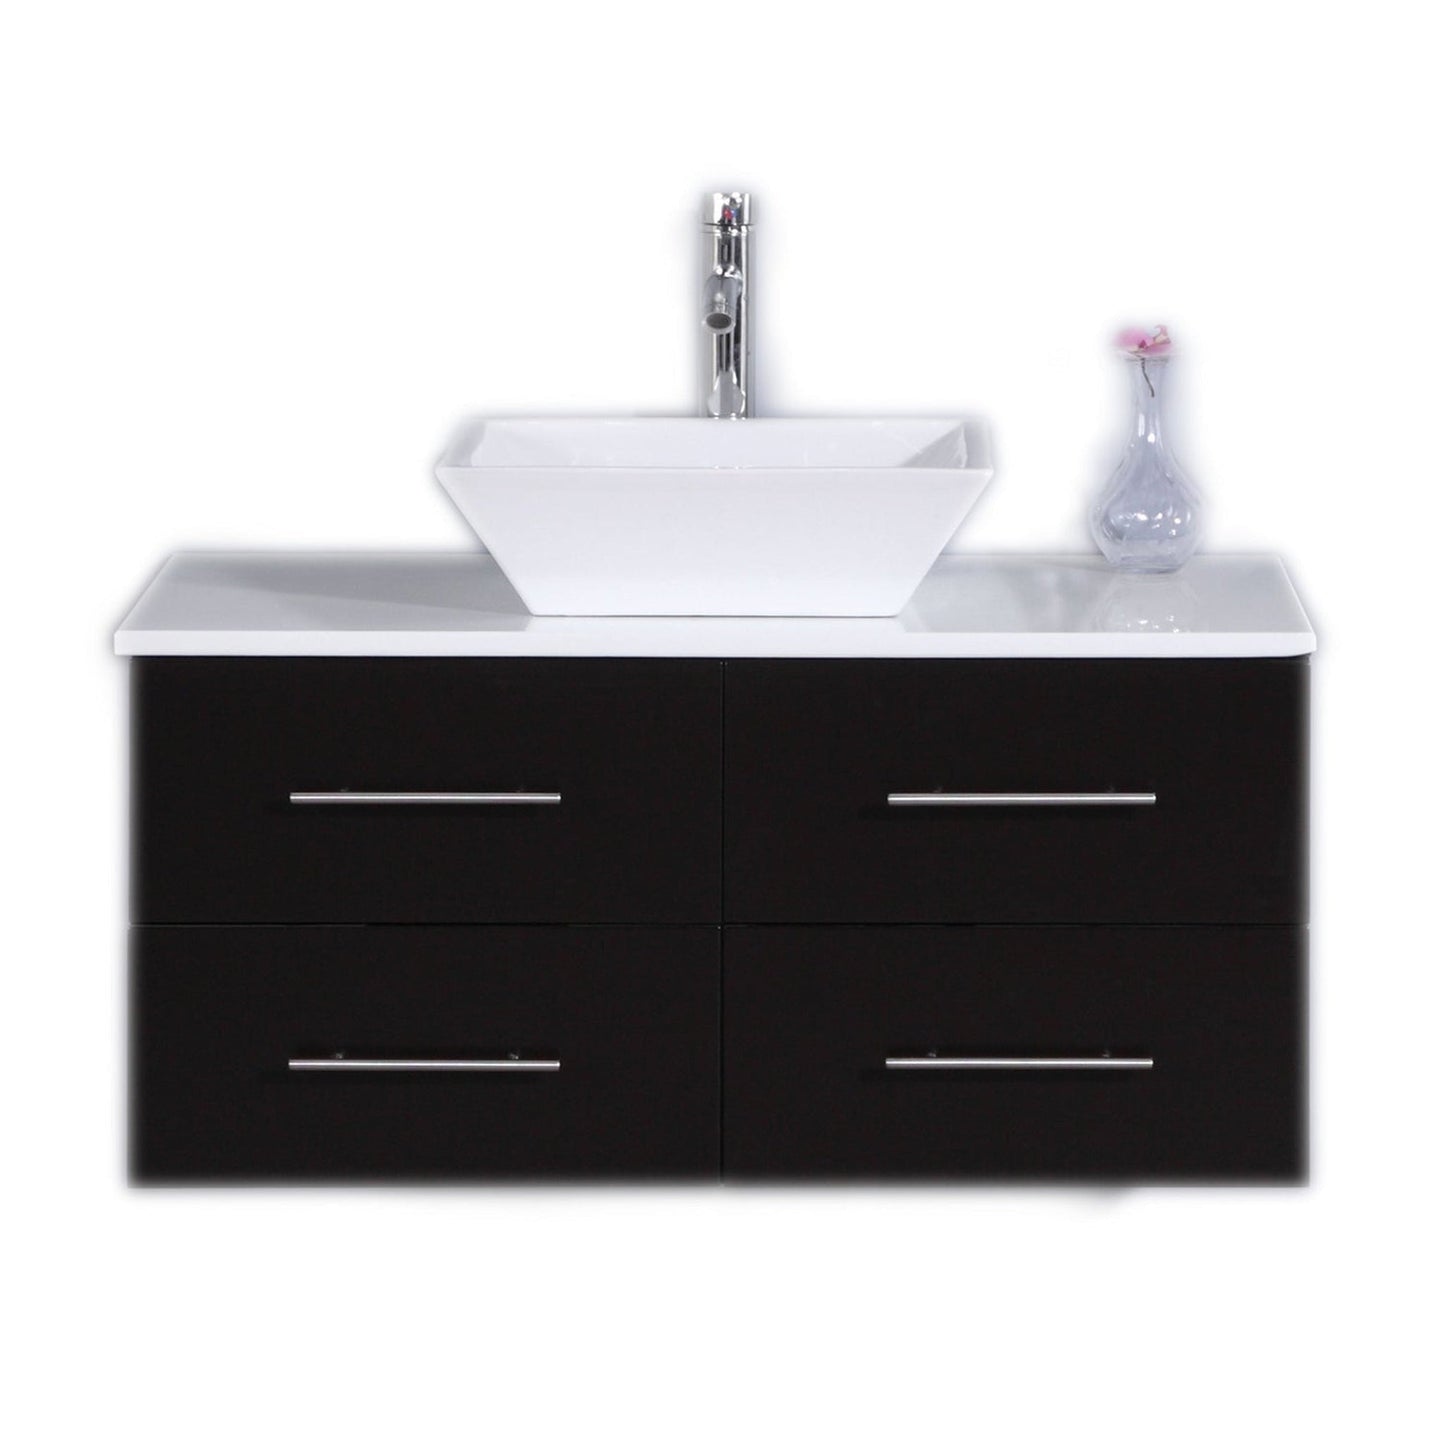 Eviva Totti Wave 36" x 16" Espresso Wall-Mounted Bathroom Vanity With White Man-Made Stone Countertop and Single Porcelain Sink